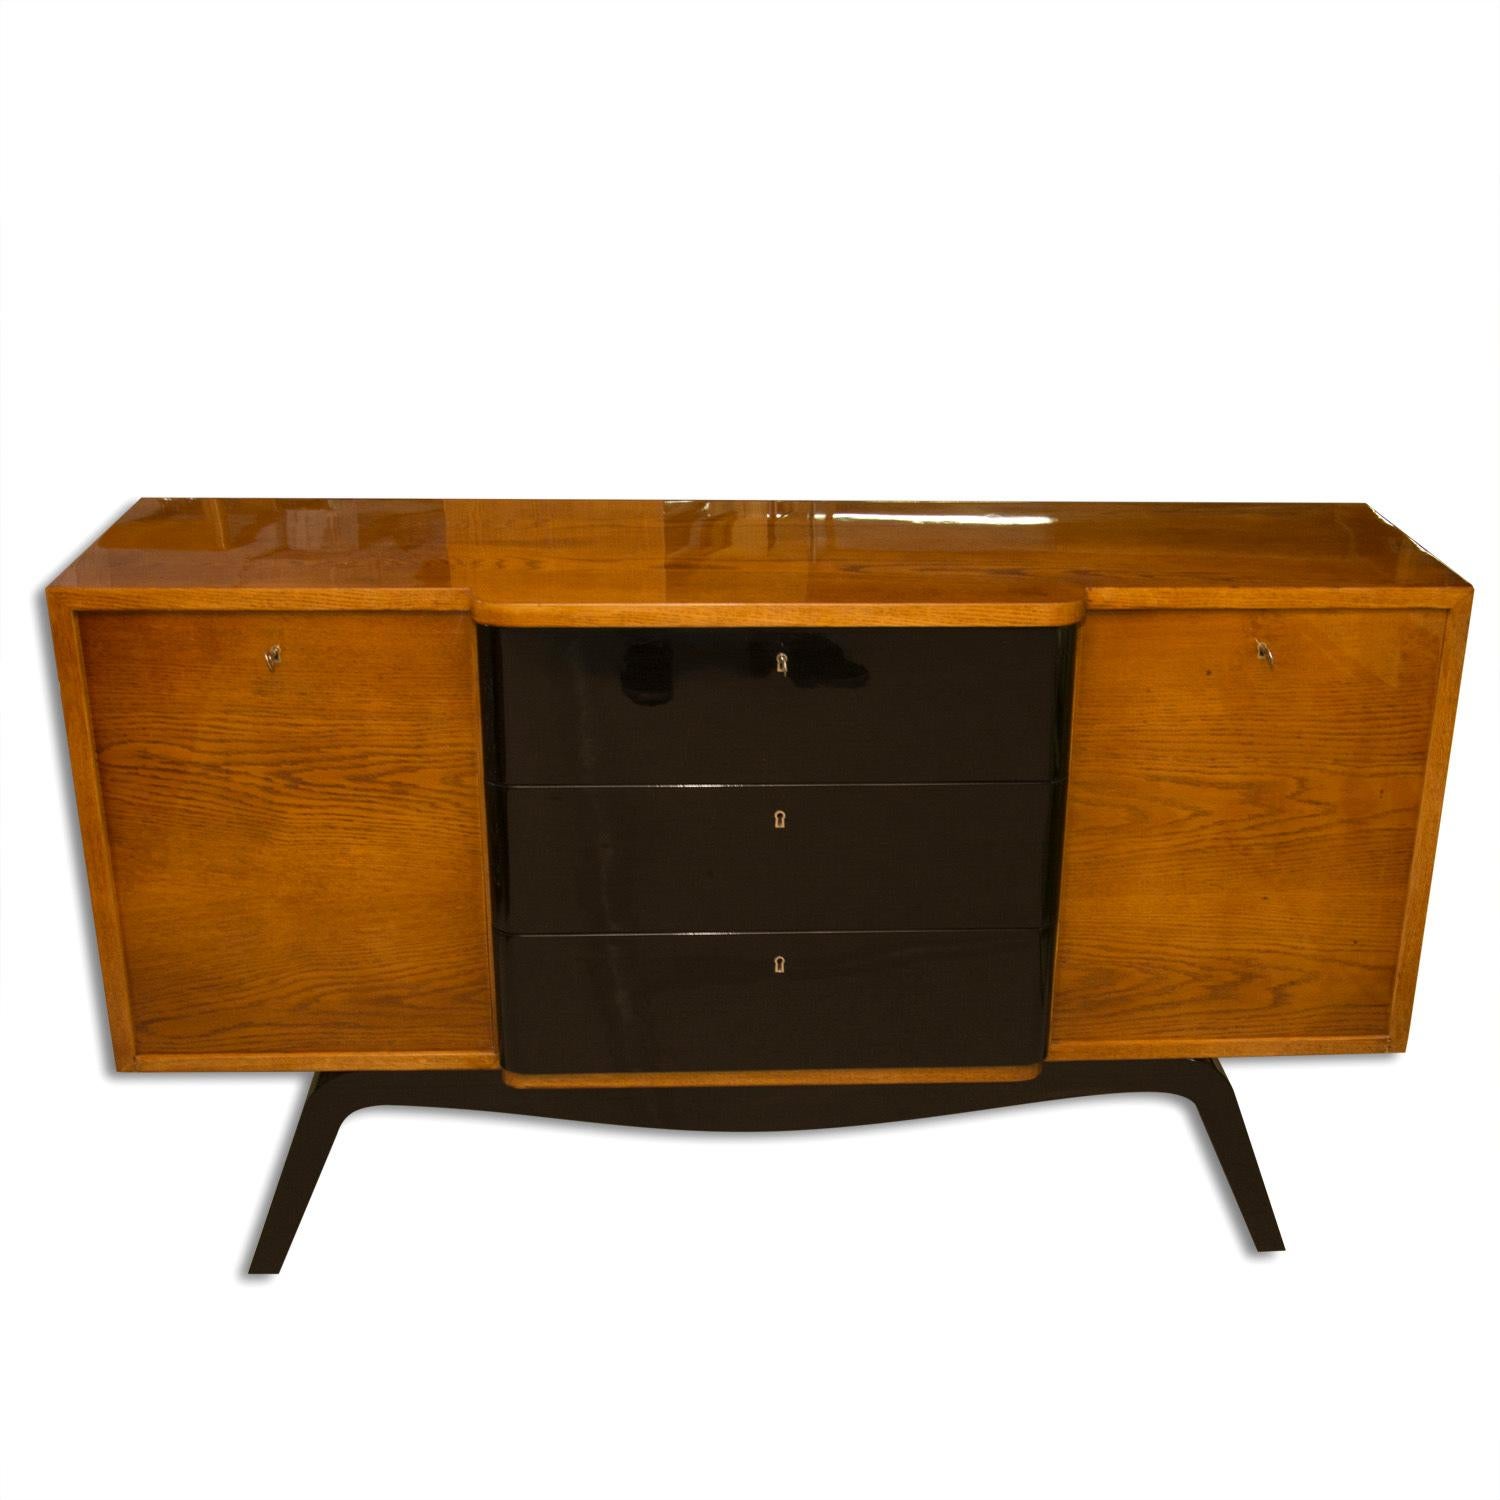 This midcentury ART DECO sideboard or chest of drawers was made in the former Czechoslovakia in the 1940´s. It is made of oakwood and the legs and drawers are varnished to a high-gloss piano finish. Very elegant and simple design. It has been fully